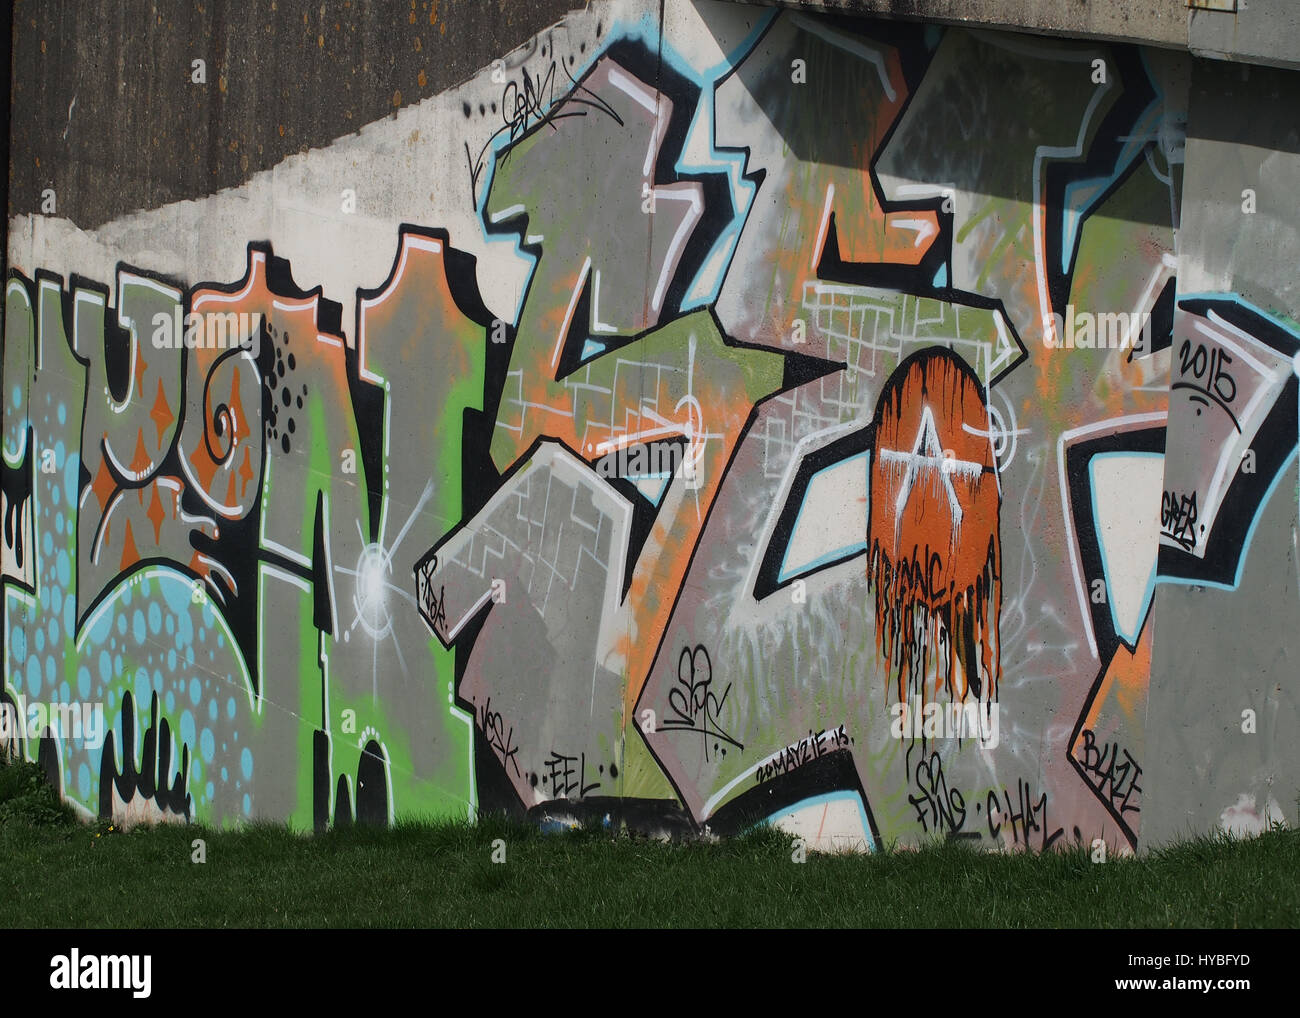 Graffiti on the side of a concrete wall in the countryside Stock Photo